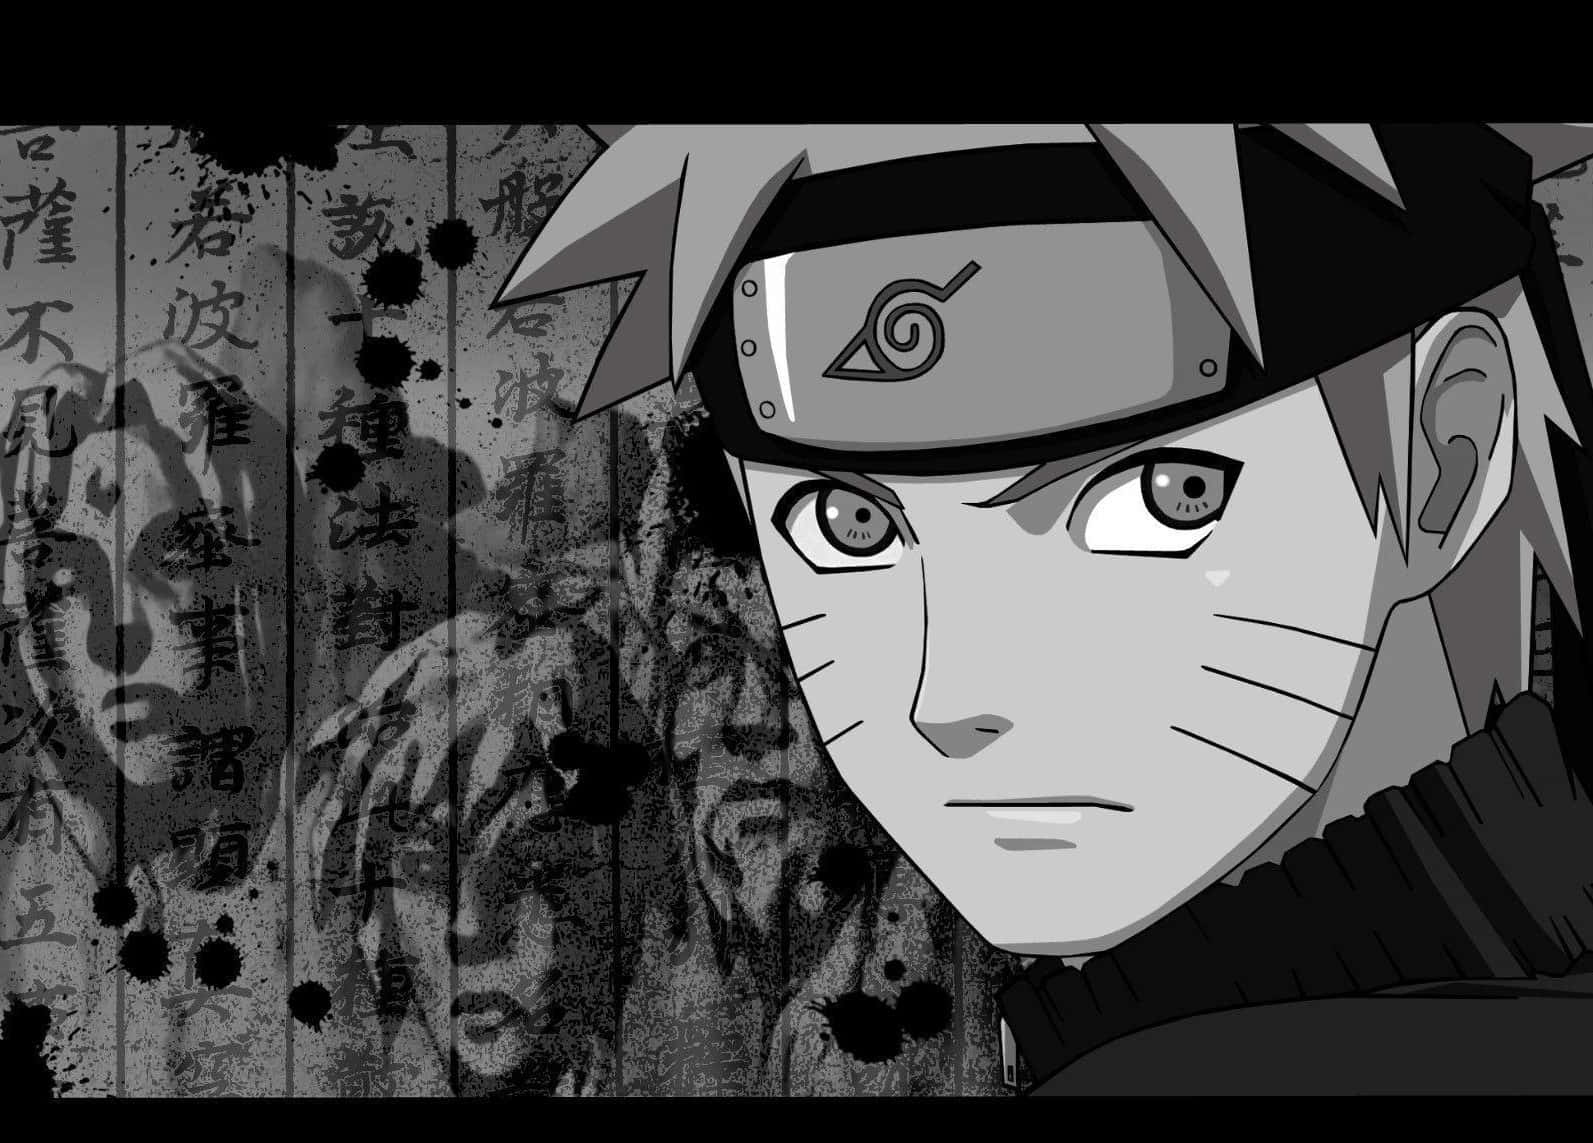 In the shadows of the night, Naruto Black descends.